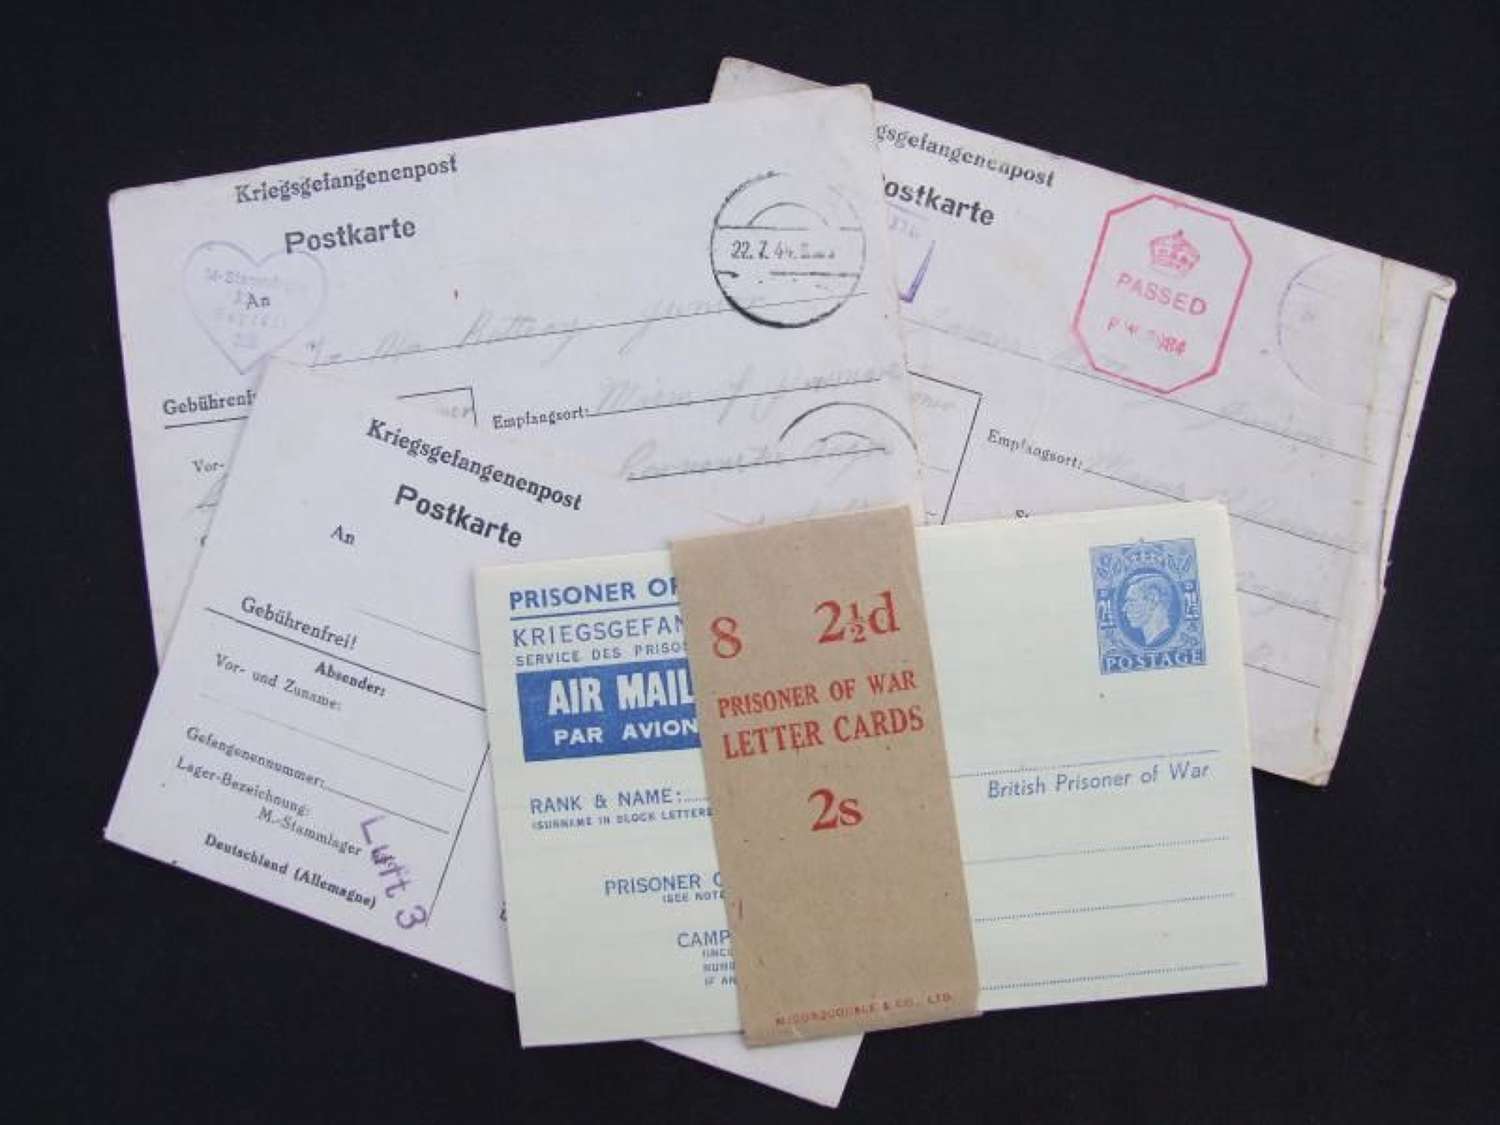 4 POW Letters Including one Unissued from Stalag Luft 3